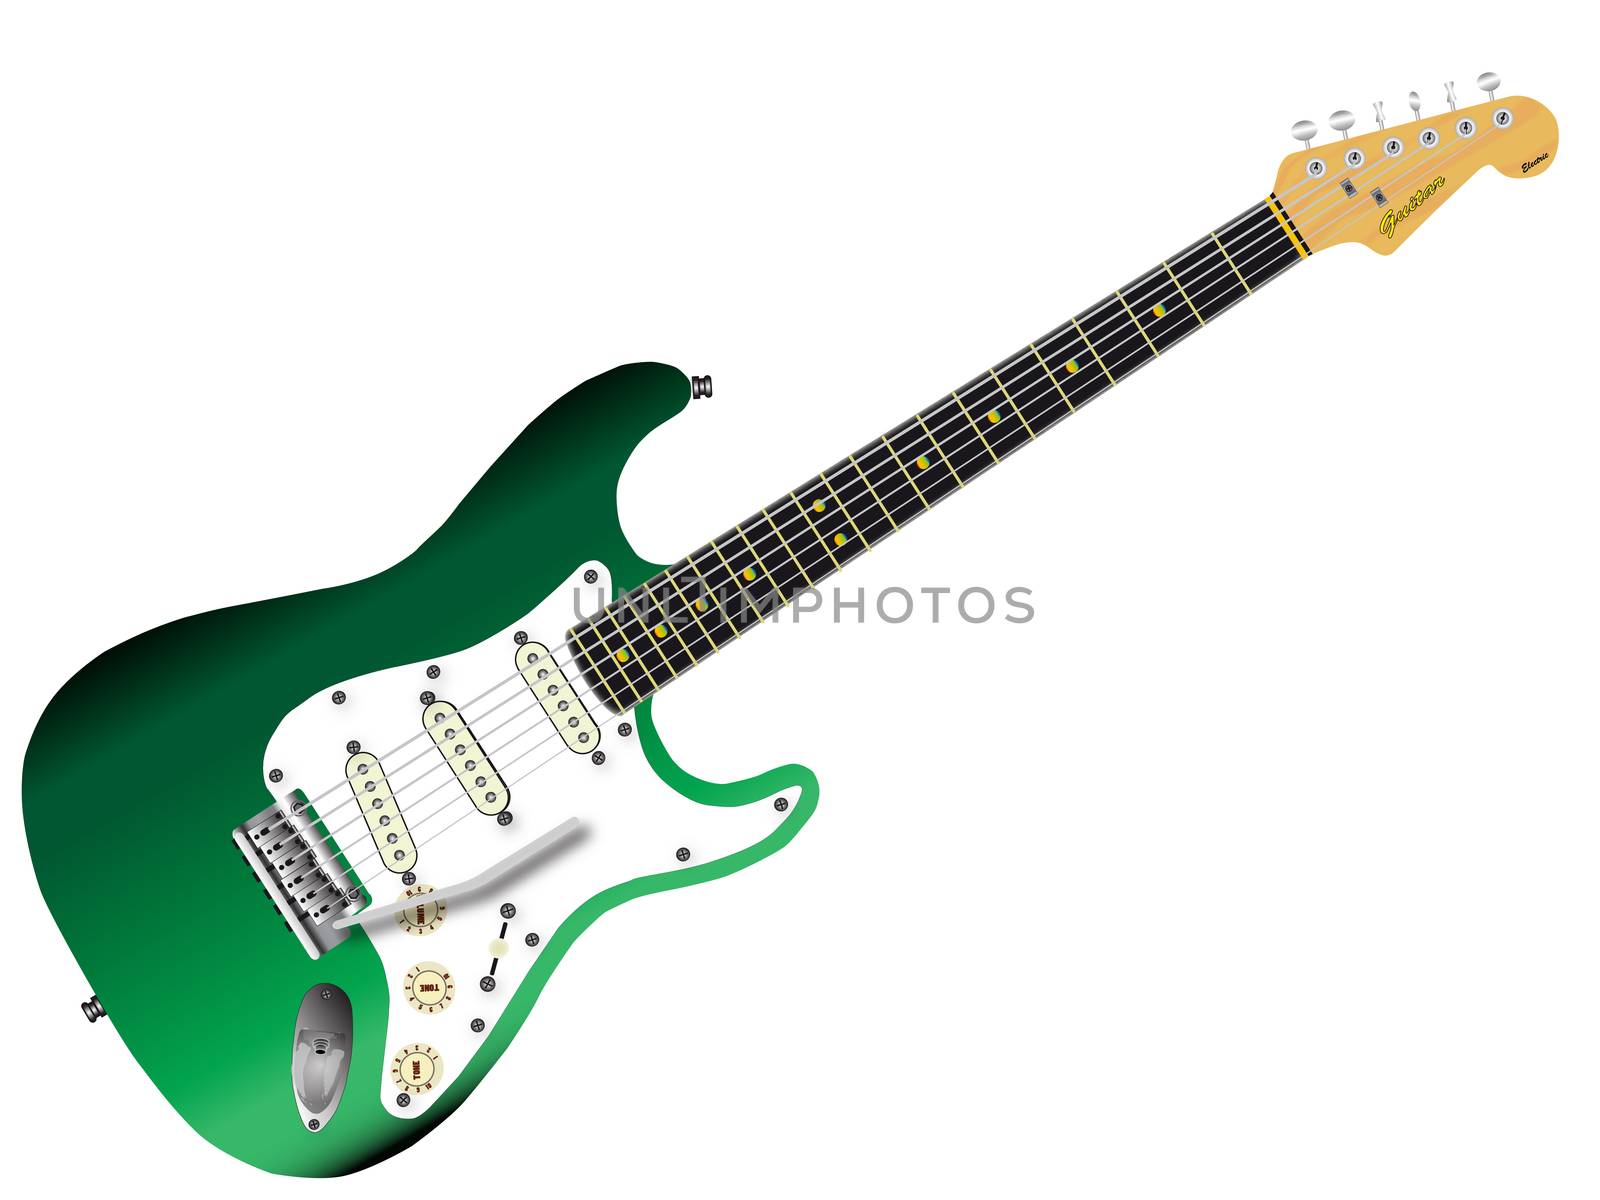 A traditional solid body electric guitar in green isolated over white.